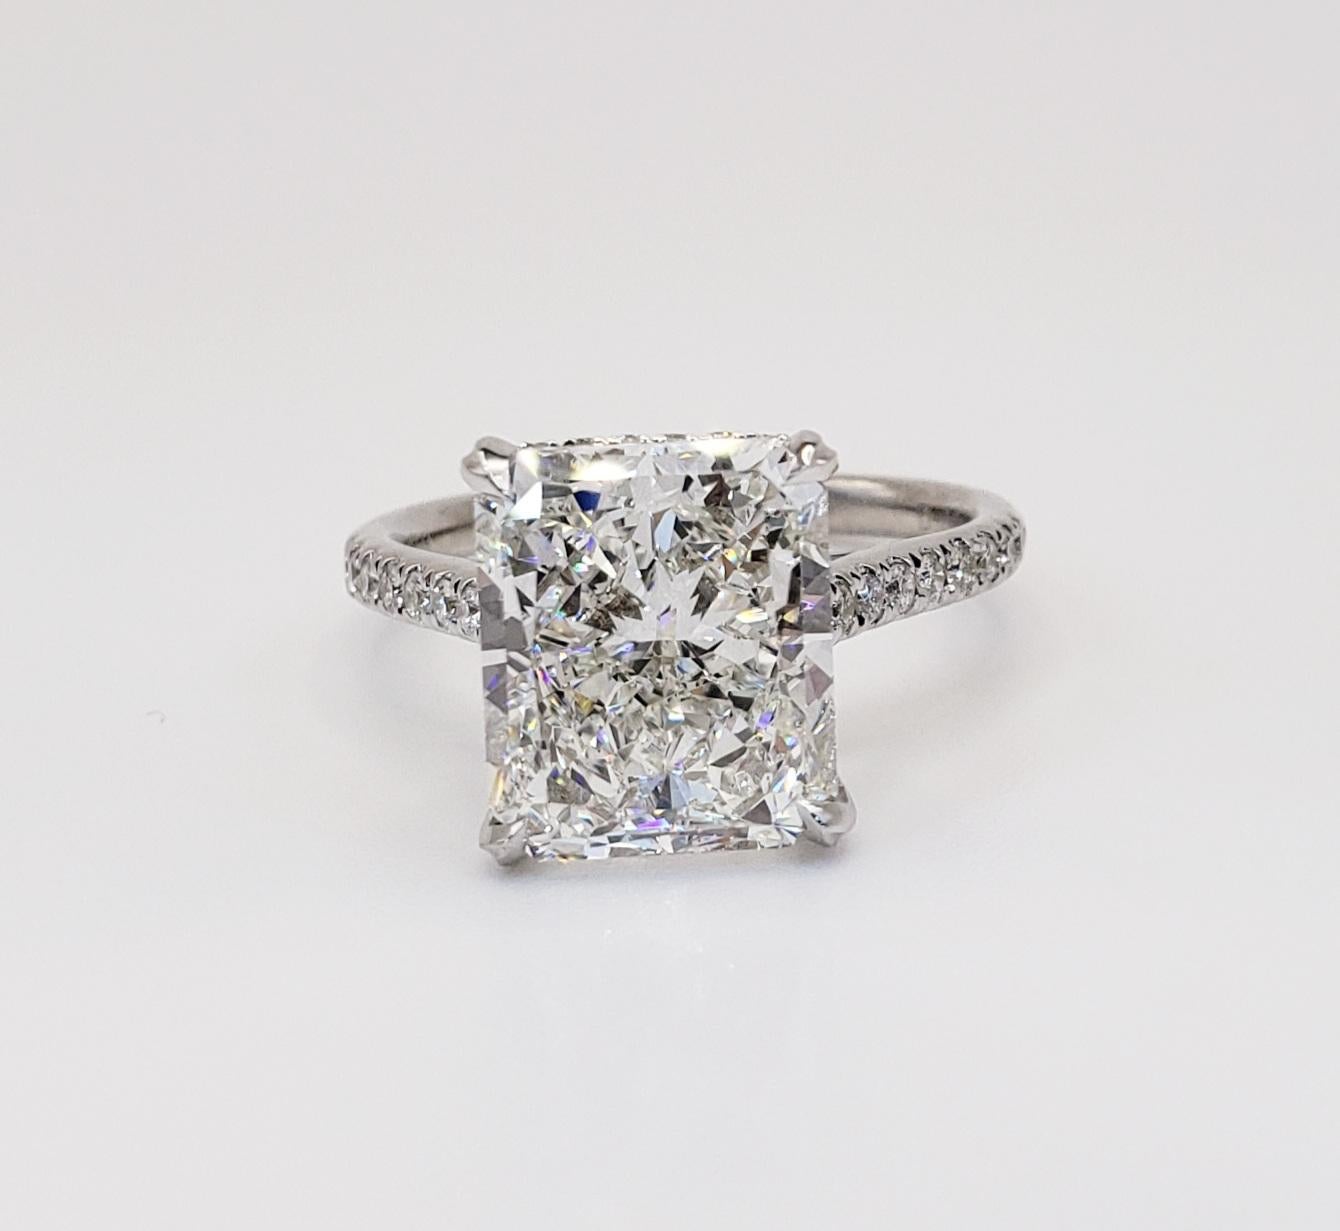 Rosenberg Diamonds & Co. 5.02 carat Radiant cut G color SI1 clarity is accompanied by a GIA certificate. This spectacular elongated Radiant is full of brilliance and it is set in a handmade 18k white gold setting. This ring continues its elegance